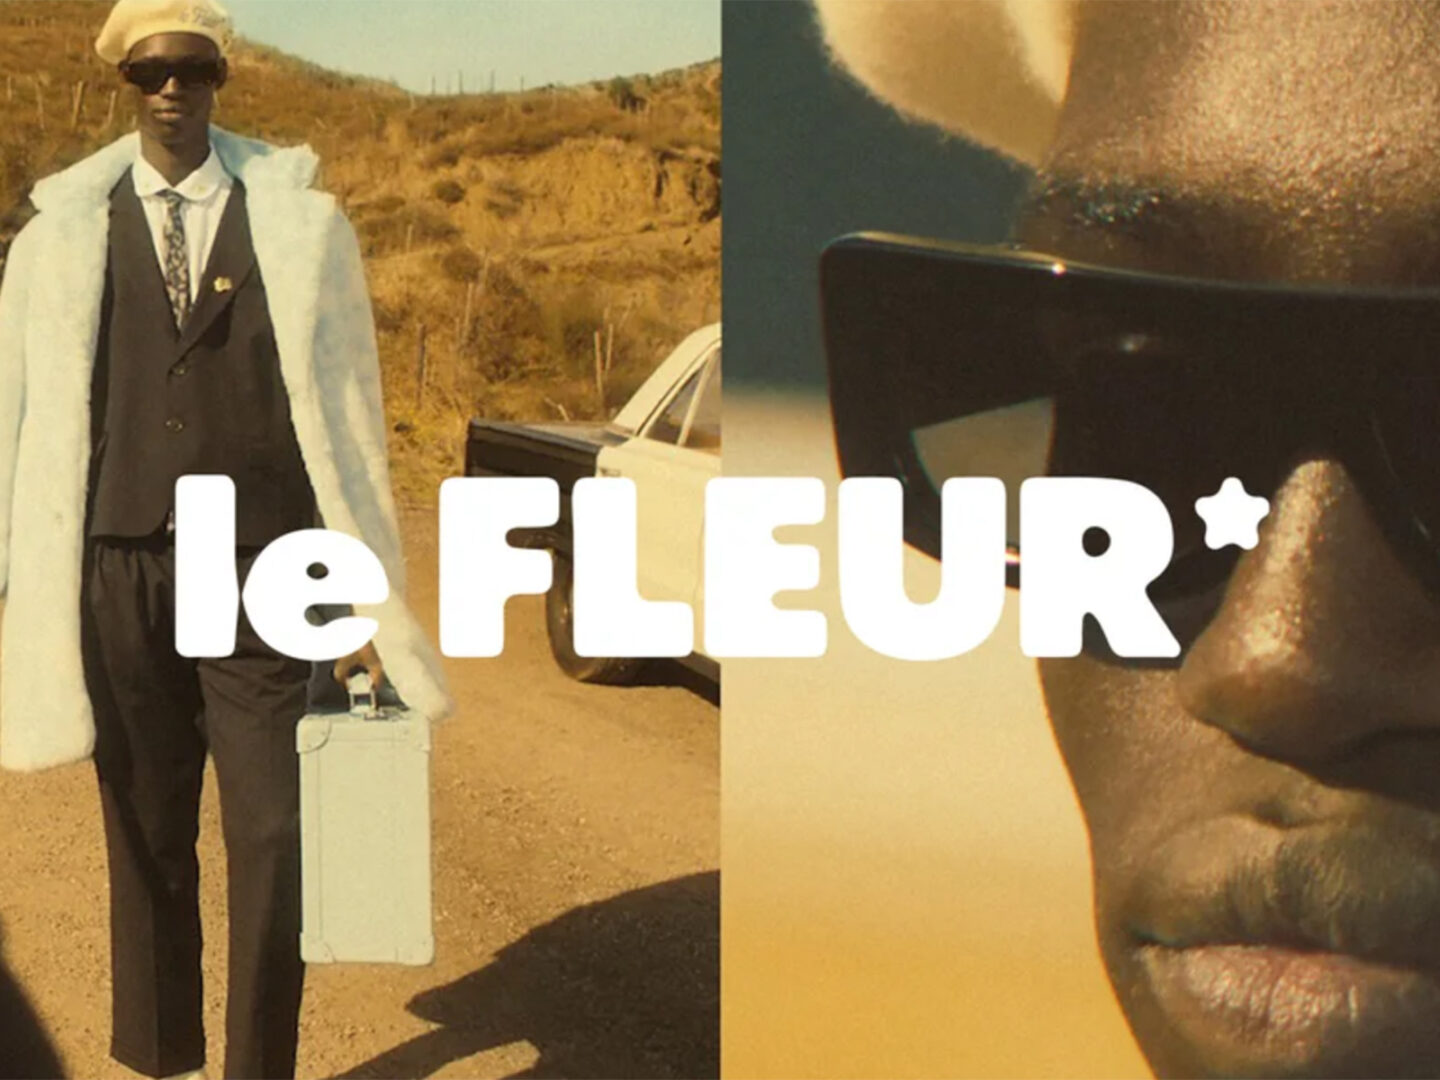 le FLEUR*’s ‘For The Sunseekers’ campaign is directed by Tyler, The Creator himself